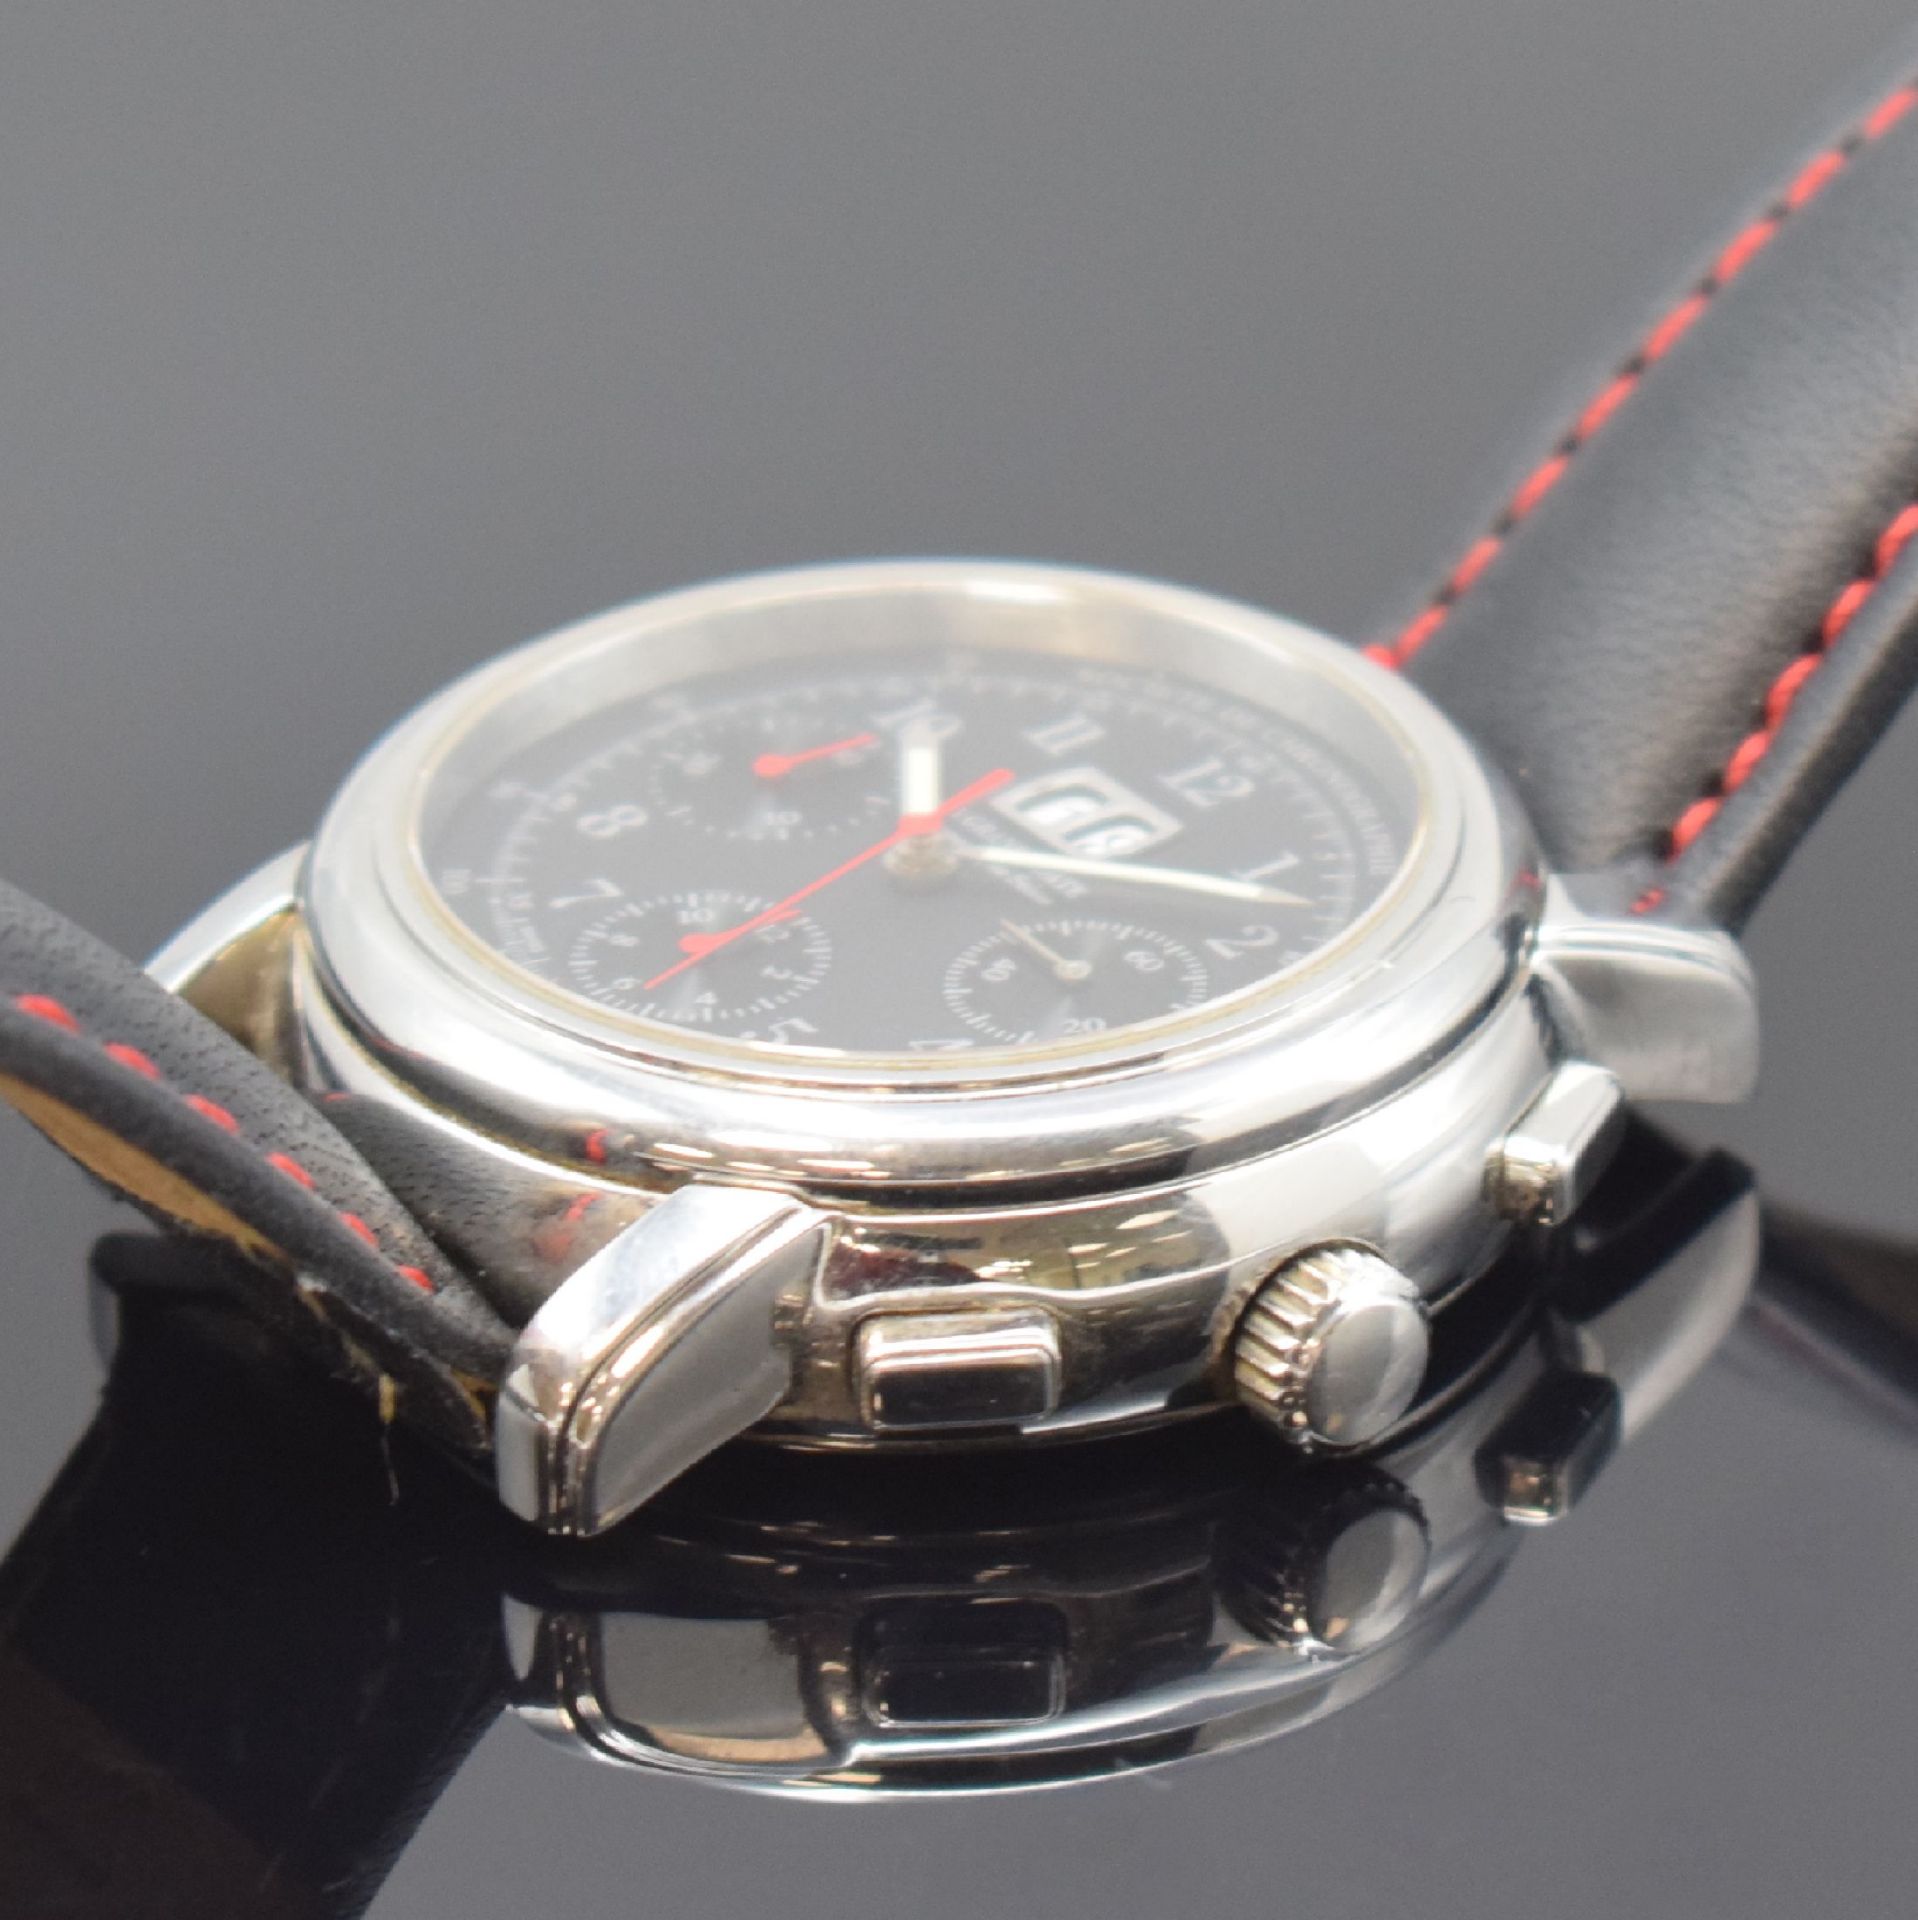 CHRONOGRAPHE SUISSE Armbandchronograph Modell Grande Date, - Image 3 of 4